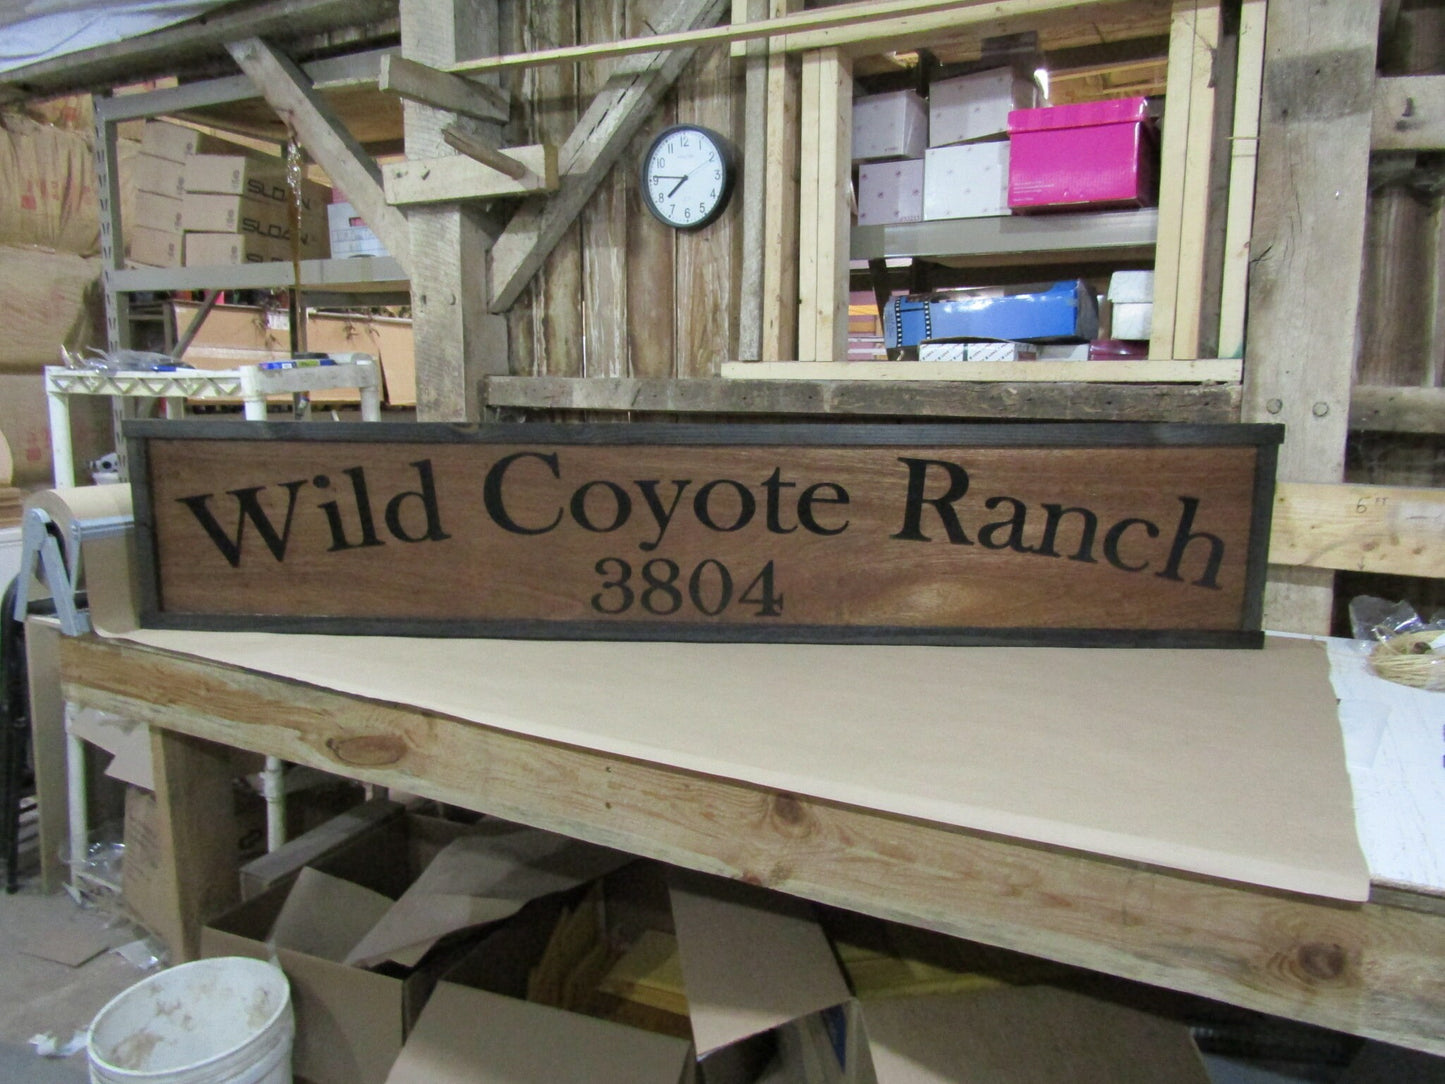 Custom Coyote Ranch Sign Company Name Address Signage Commerical Oversized Rustic Business Logo Wood Laser Cut Out 3D Extra Large Handmade